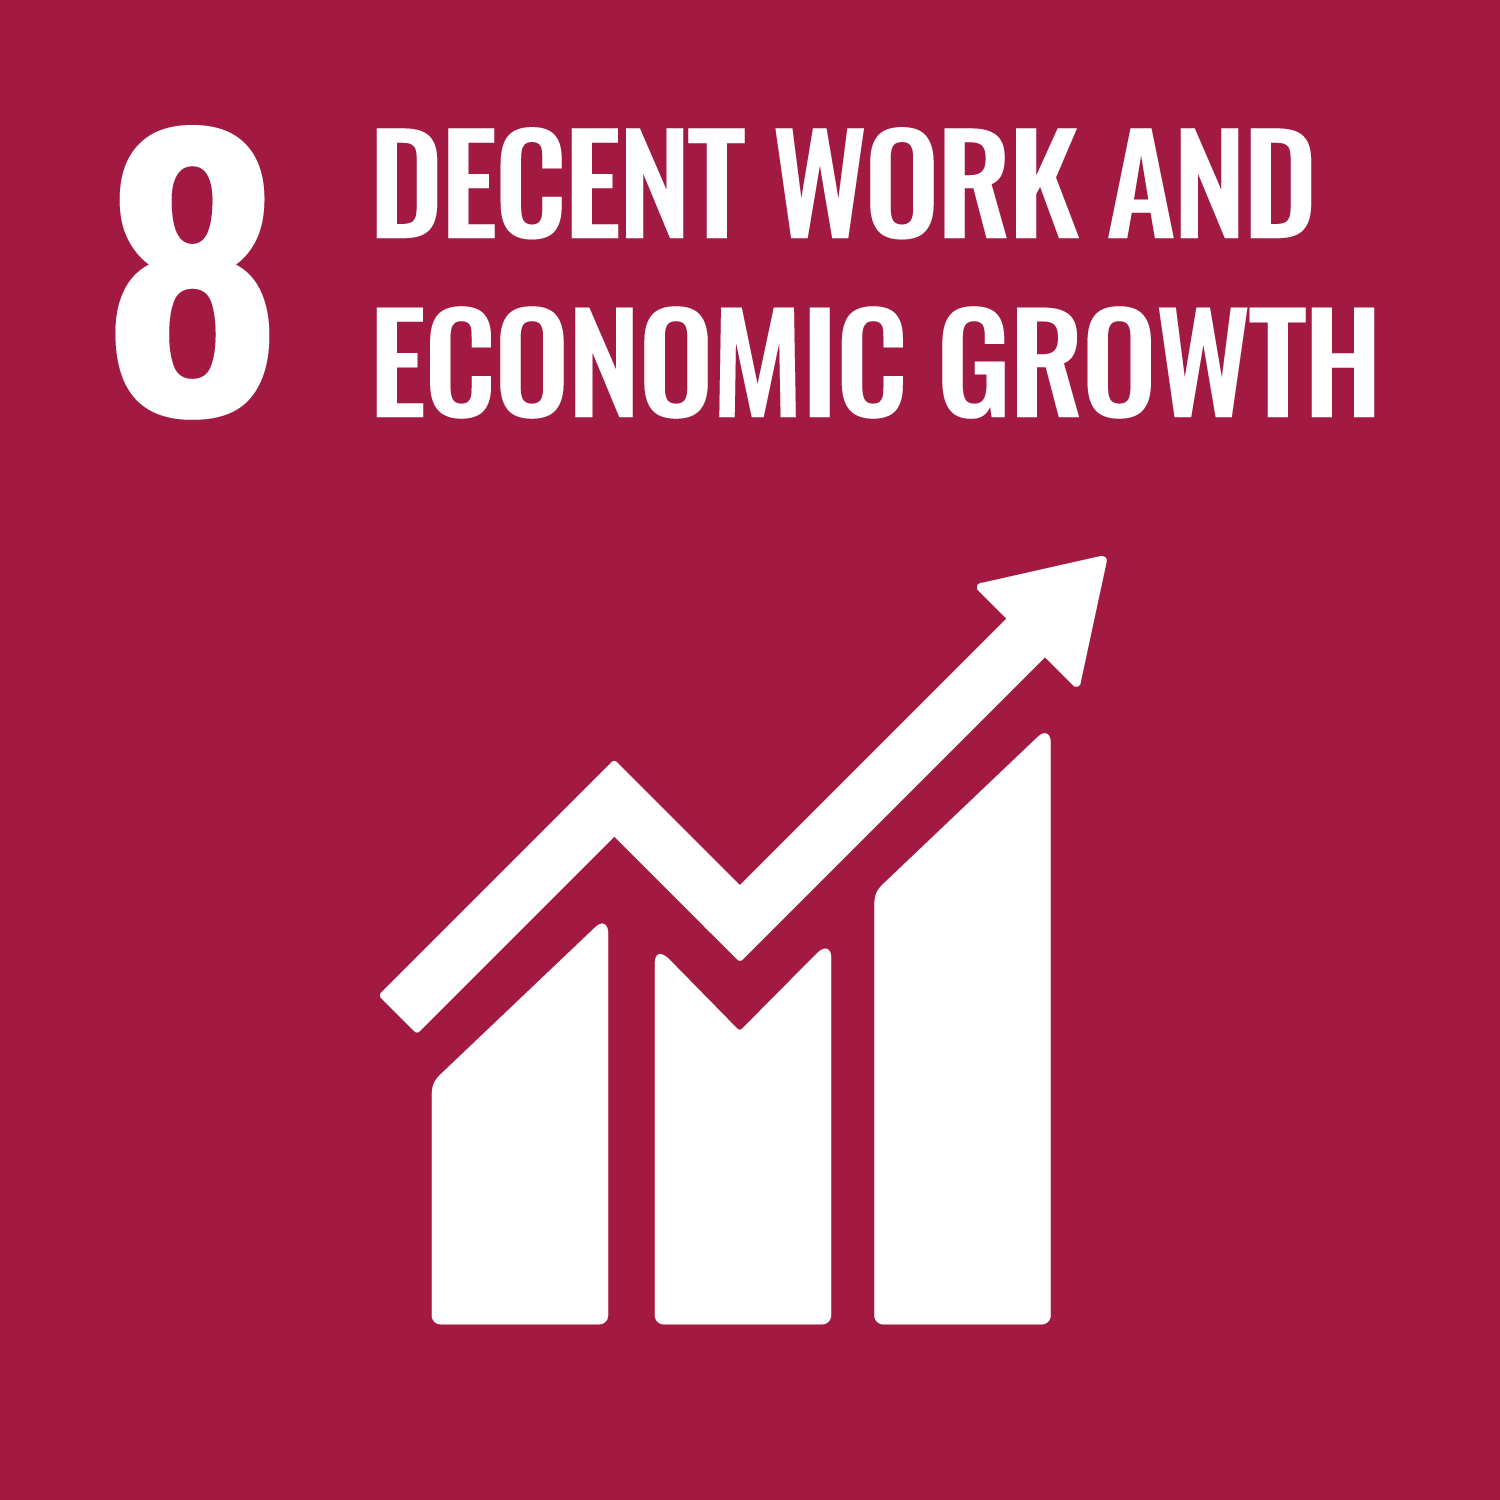 08.DECENT WORK AND ECONOMIC GROWTH